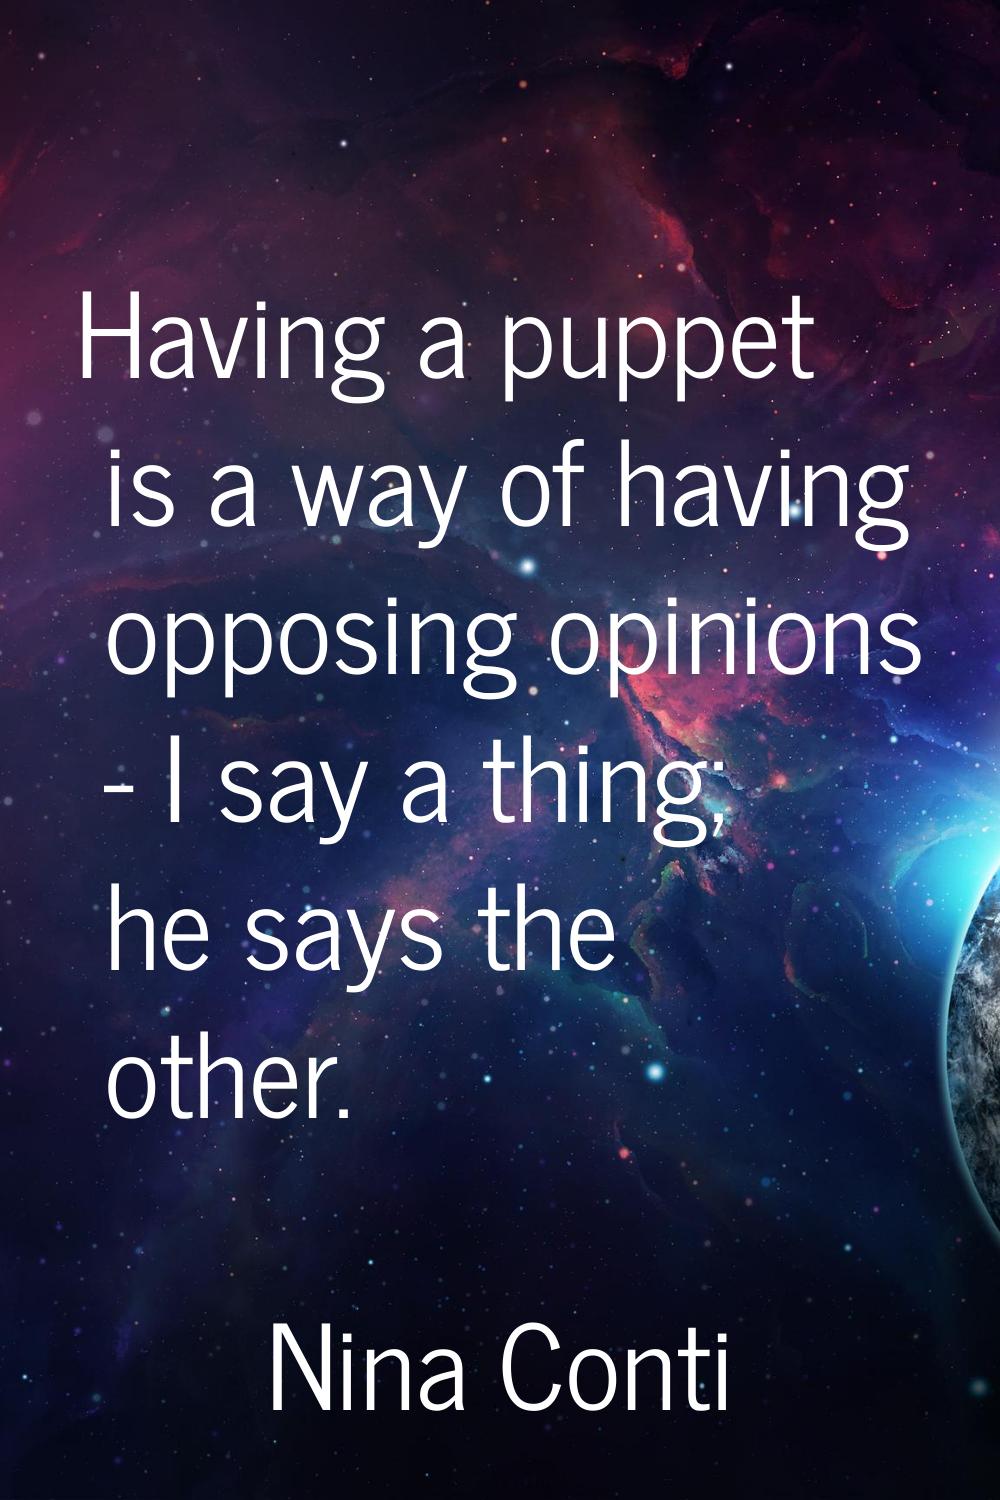 Having a puppet is a way of having opposing opinions - I say a thing; he says the other.